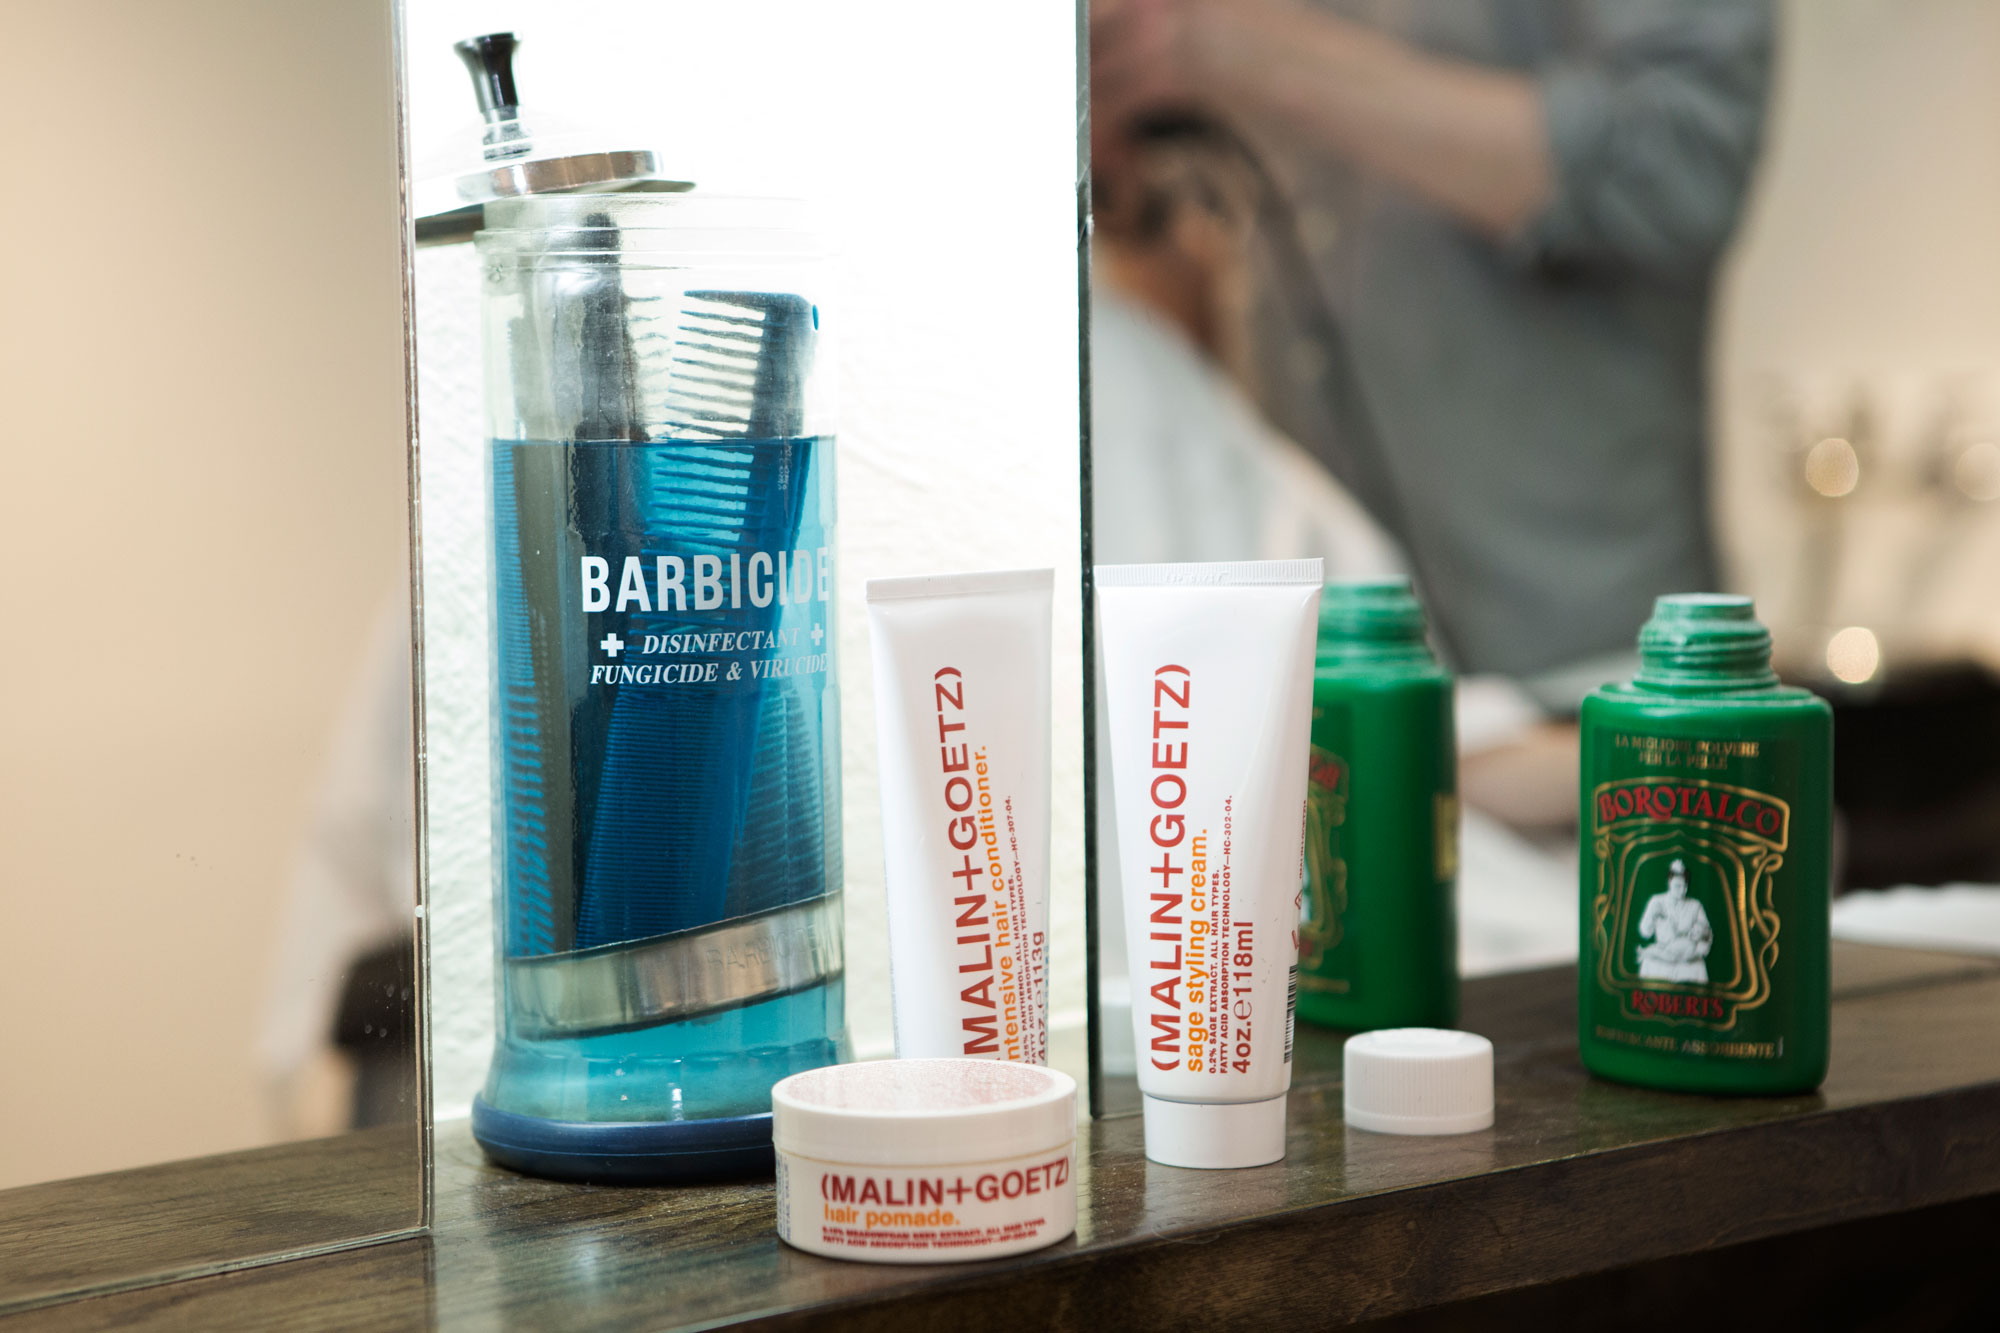 The New NYC Barbershop Offers Premium Malin+Goetz Products